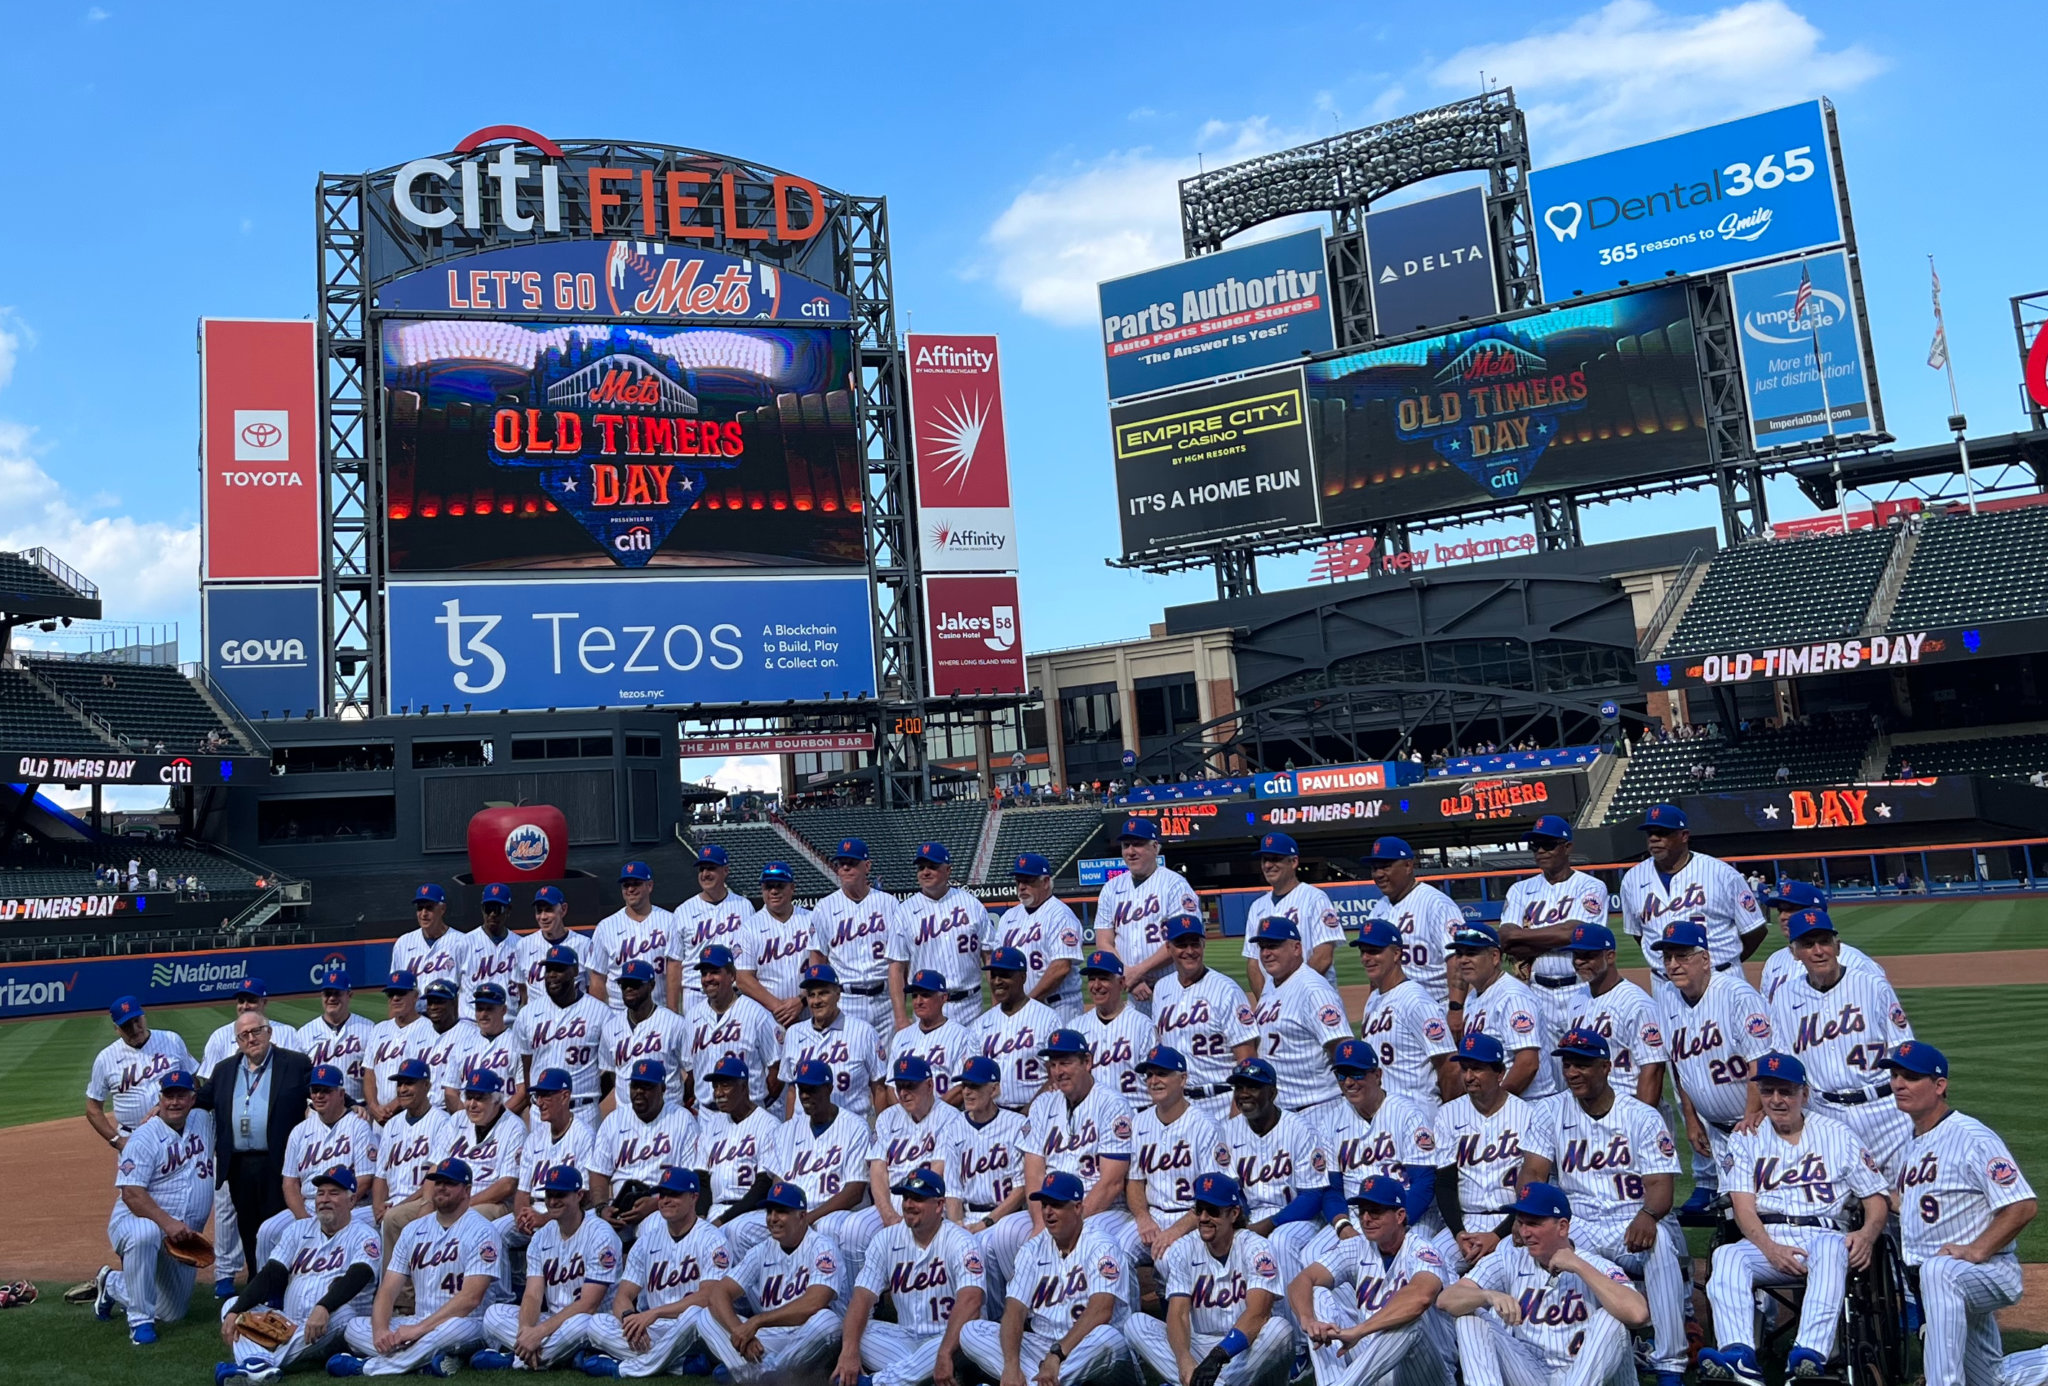 Mets Old Timers’ Day Alumni lauding Steve Cohen’s efforts to celebrate